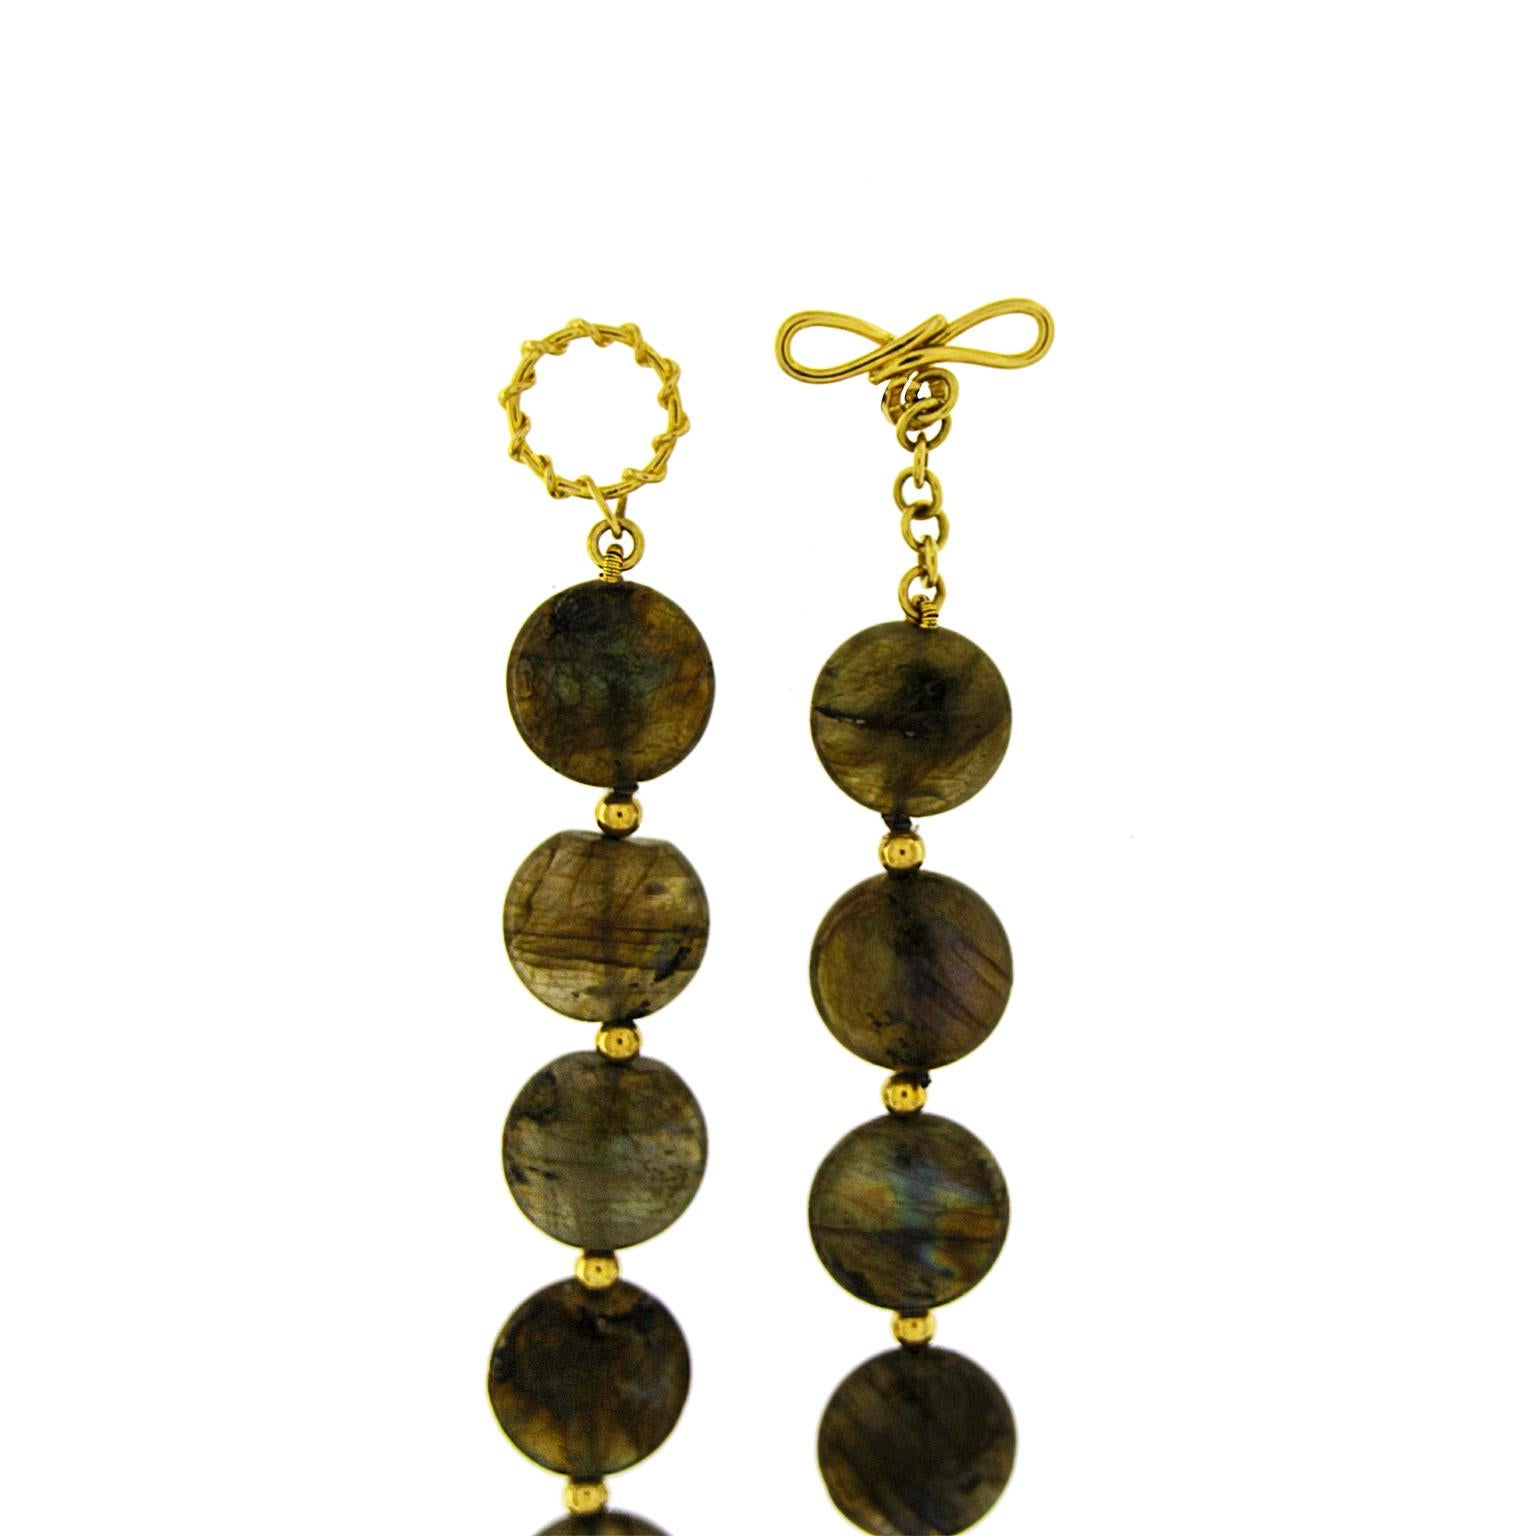 Opalescent luster prized in labradorite is the focus of this necklace. Carved into disks, the gem is strung on a wire. Each disk differs, some are more transparent and others have more flecks of a blue undertone. A small globe of 18k yellow gold is